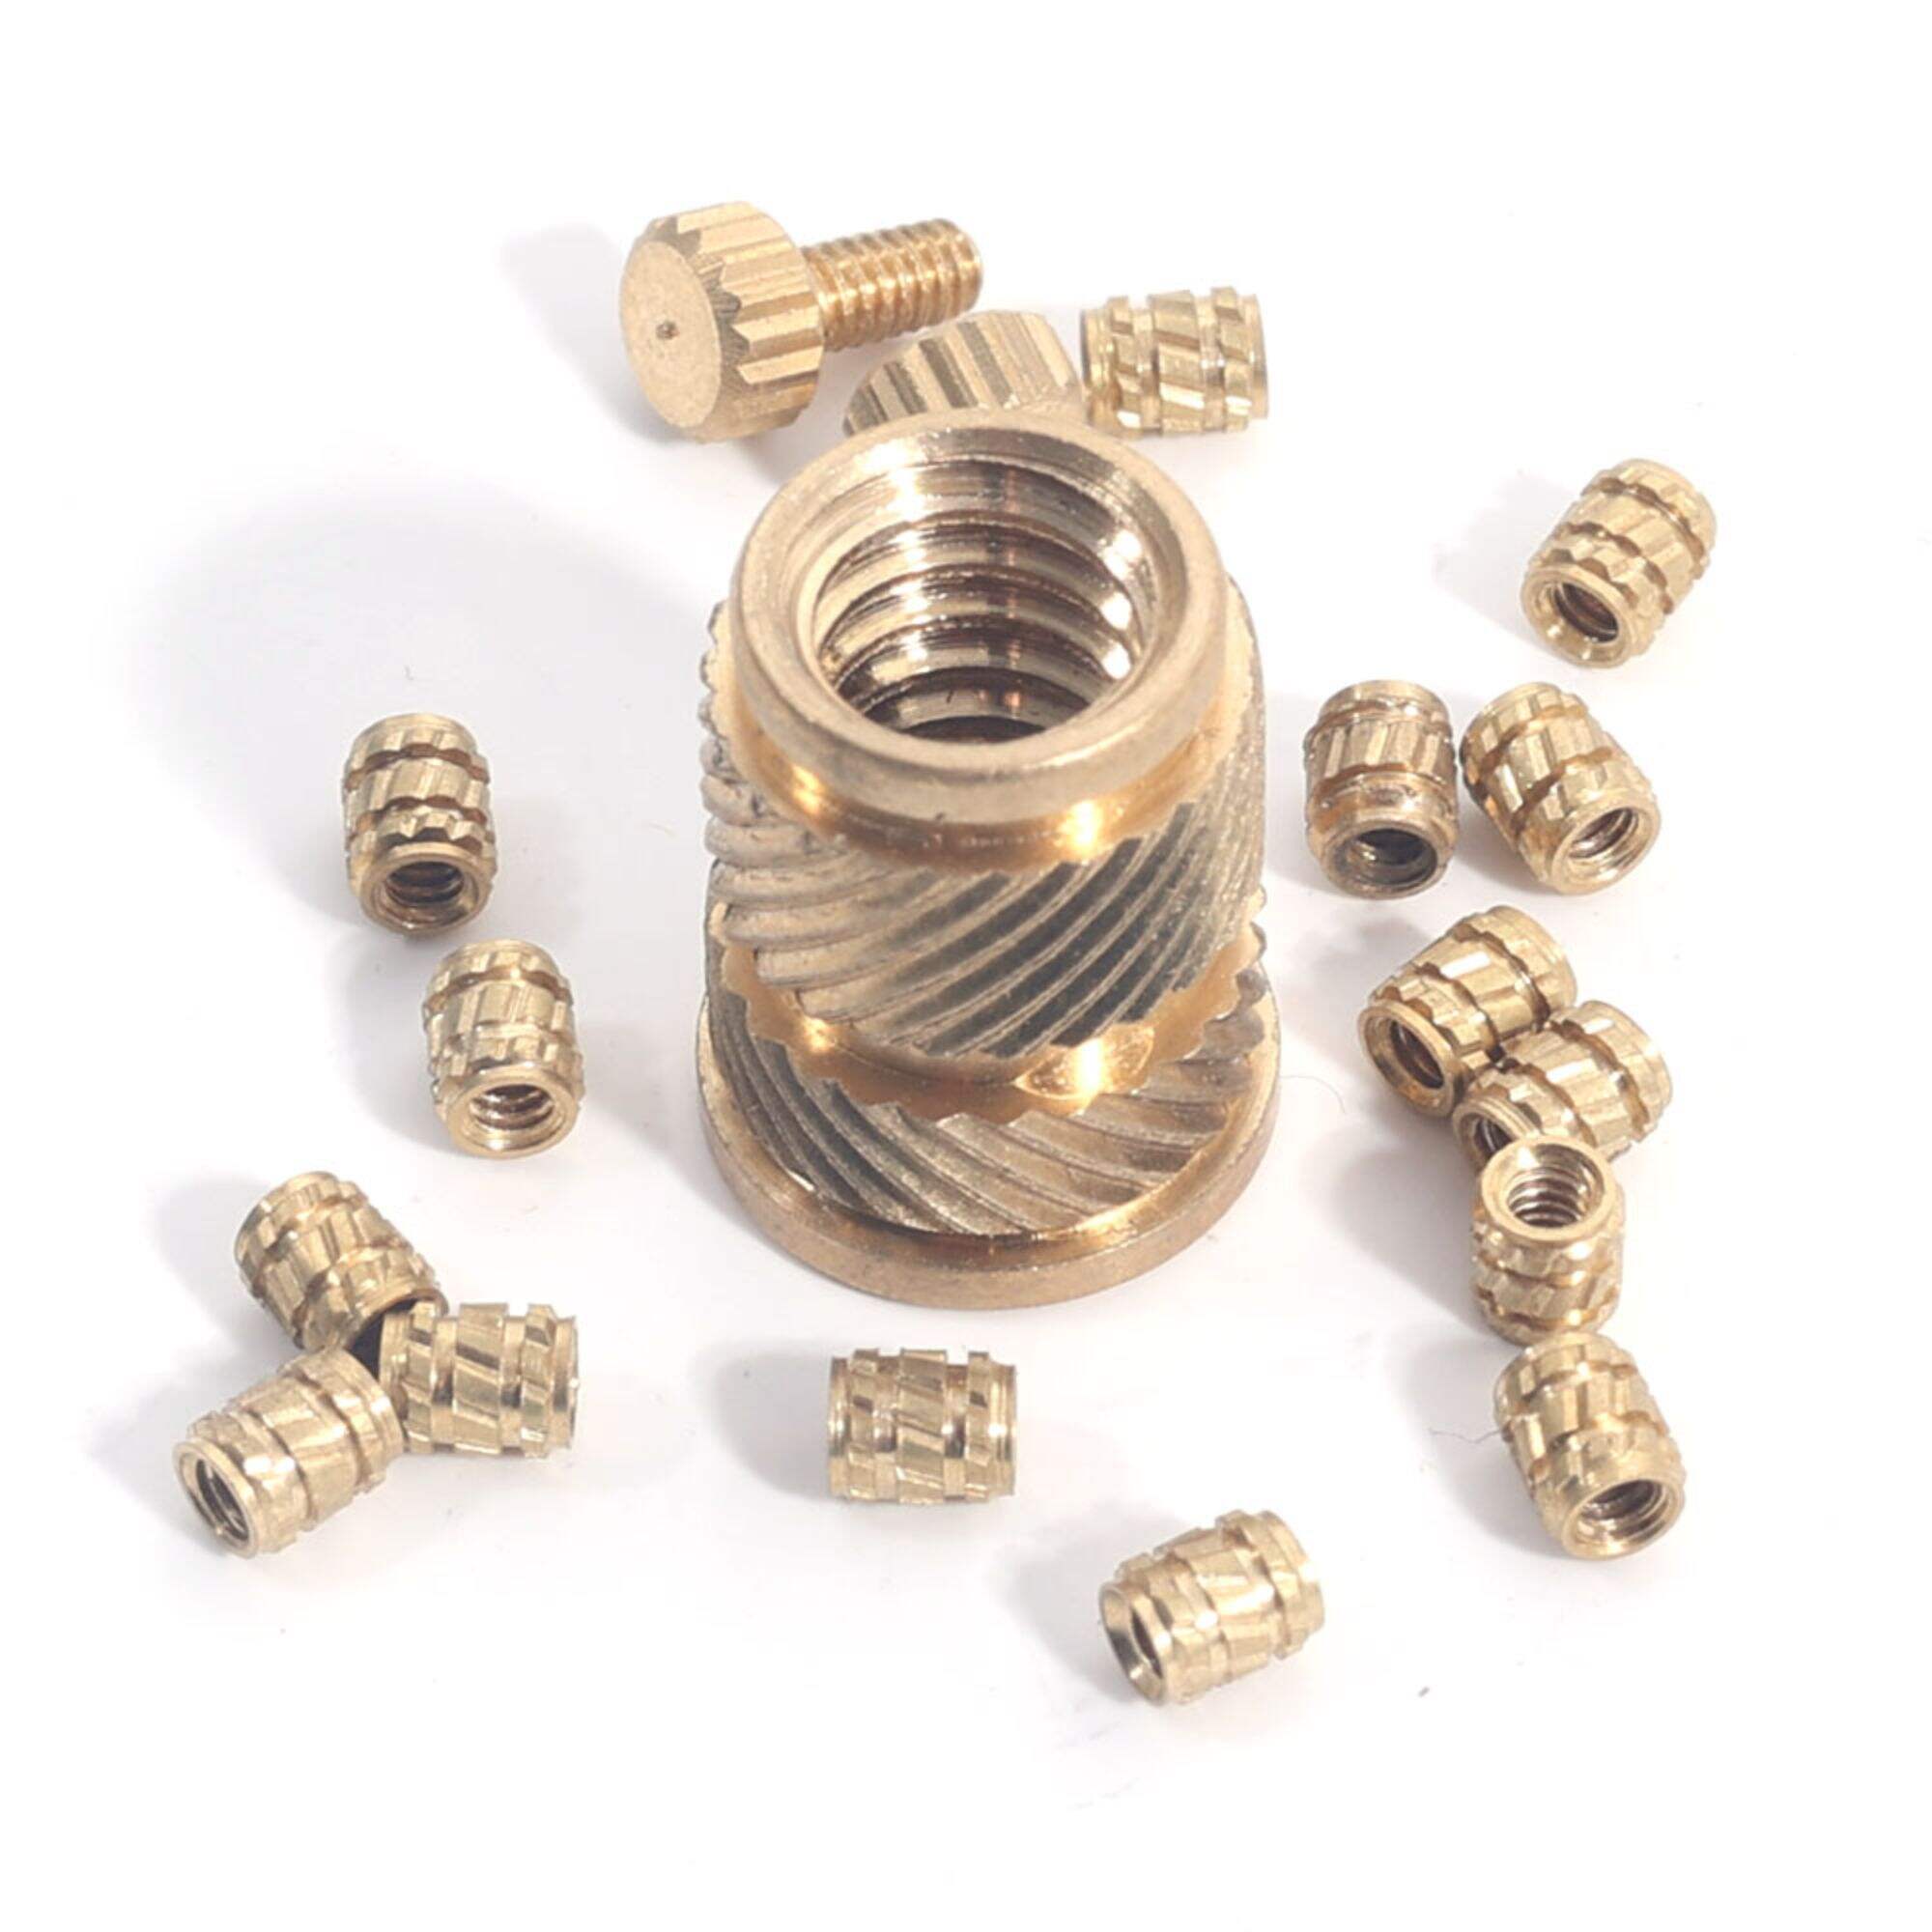 DIN16903 Flanged Straight Knurl Straight Blind Self Tapping Screw Expand Thru Threaded Brass Insert Nut